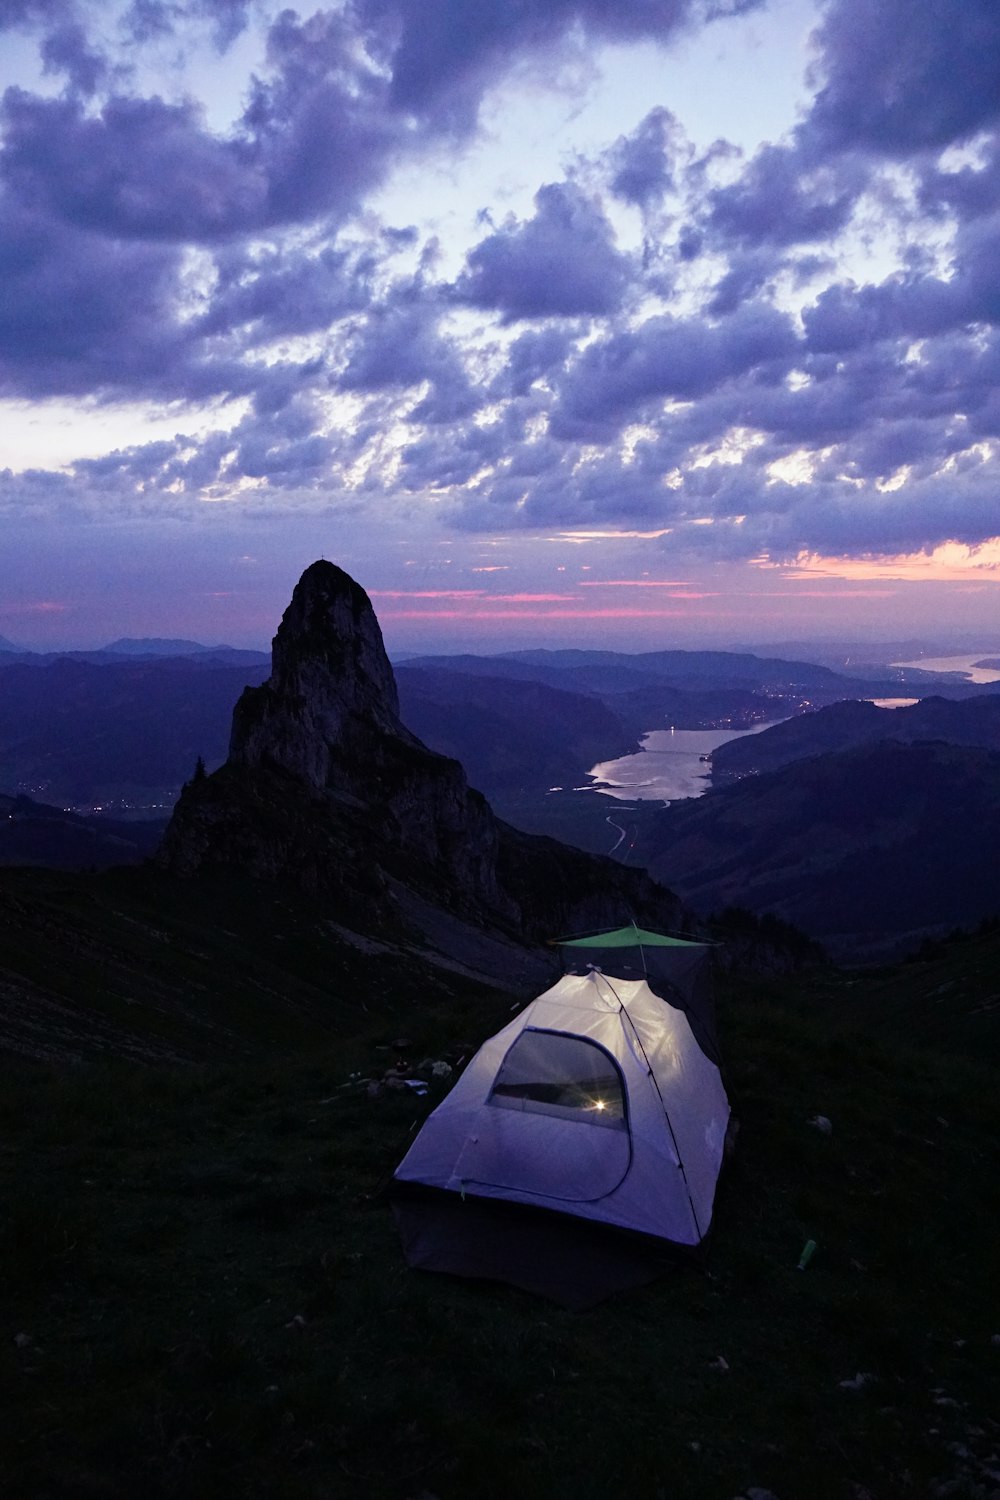 lighted tent on mountain top under clouded sky